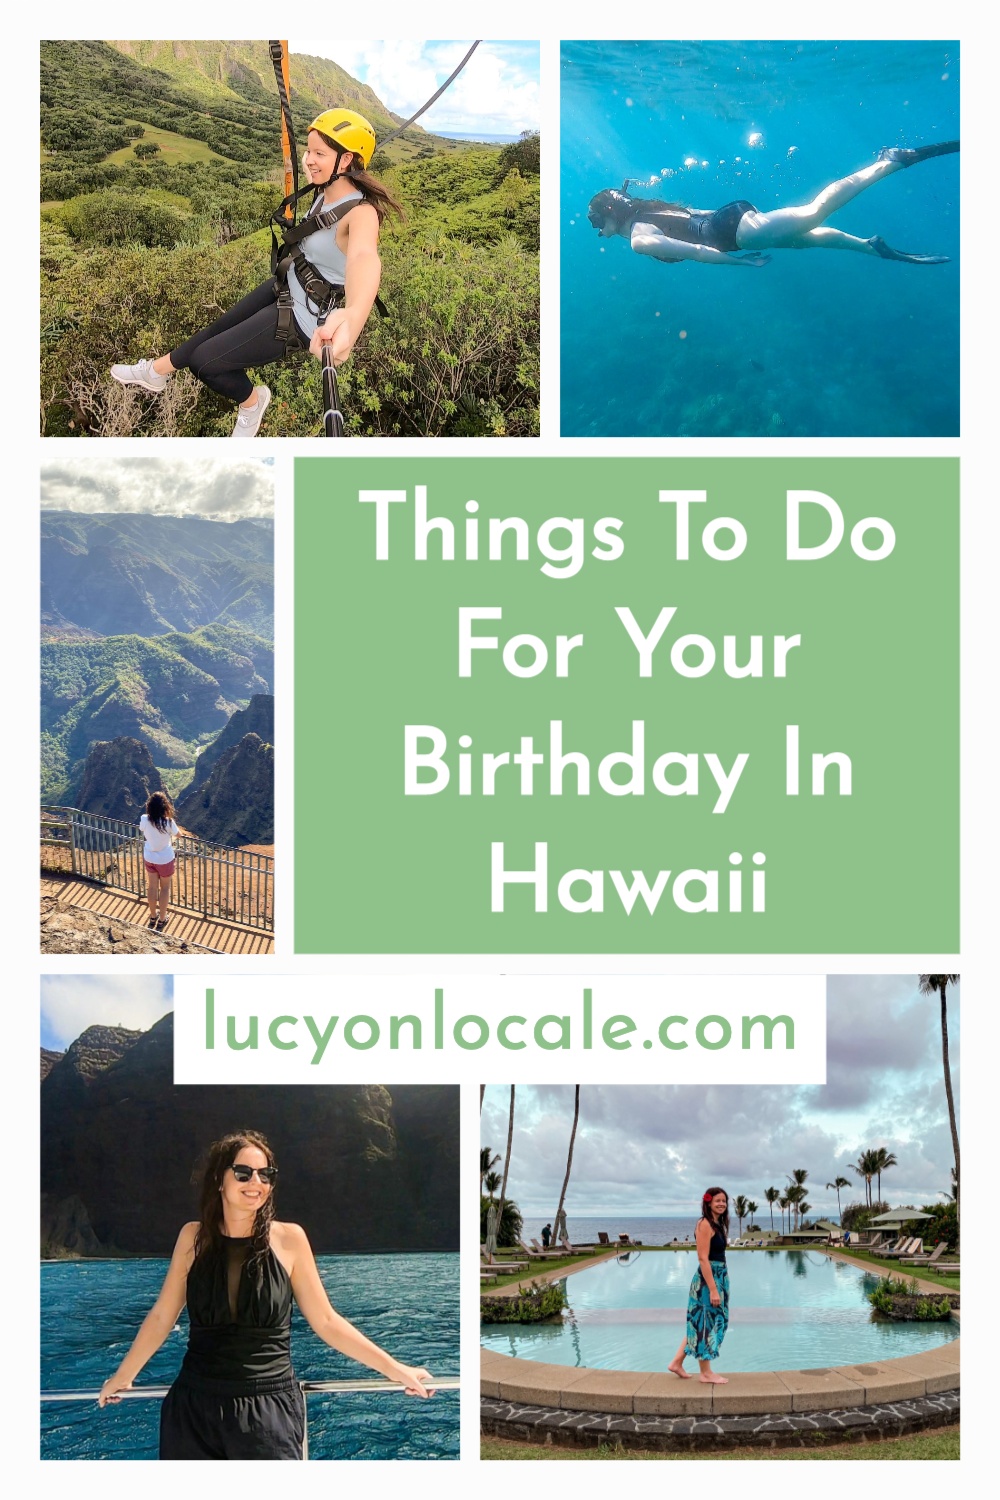 Things To Do for Your Birthday in Hawaii